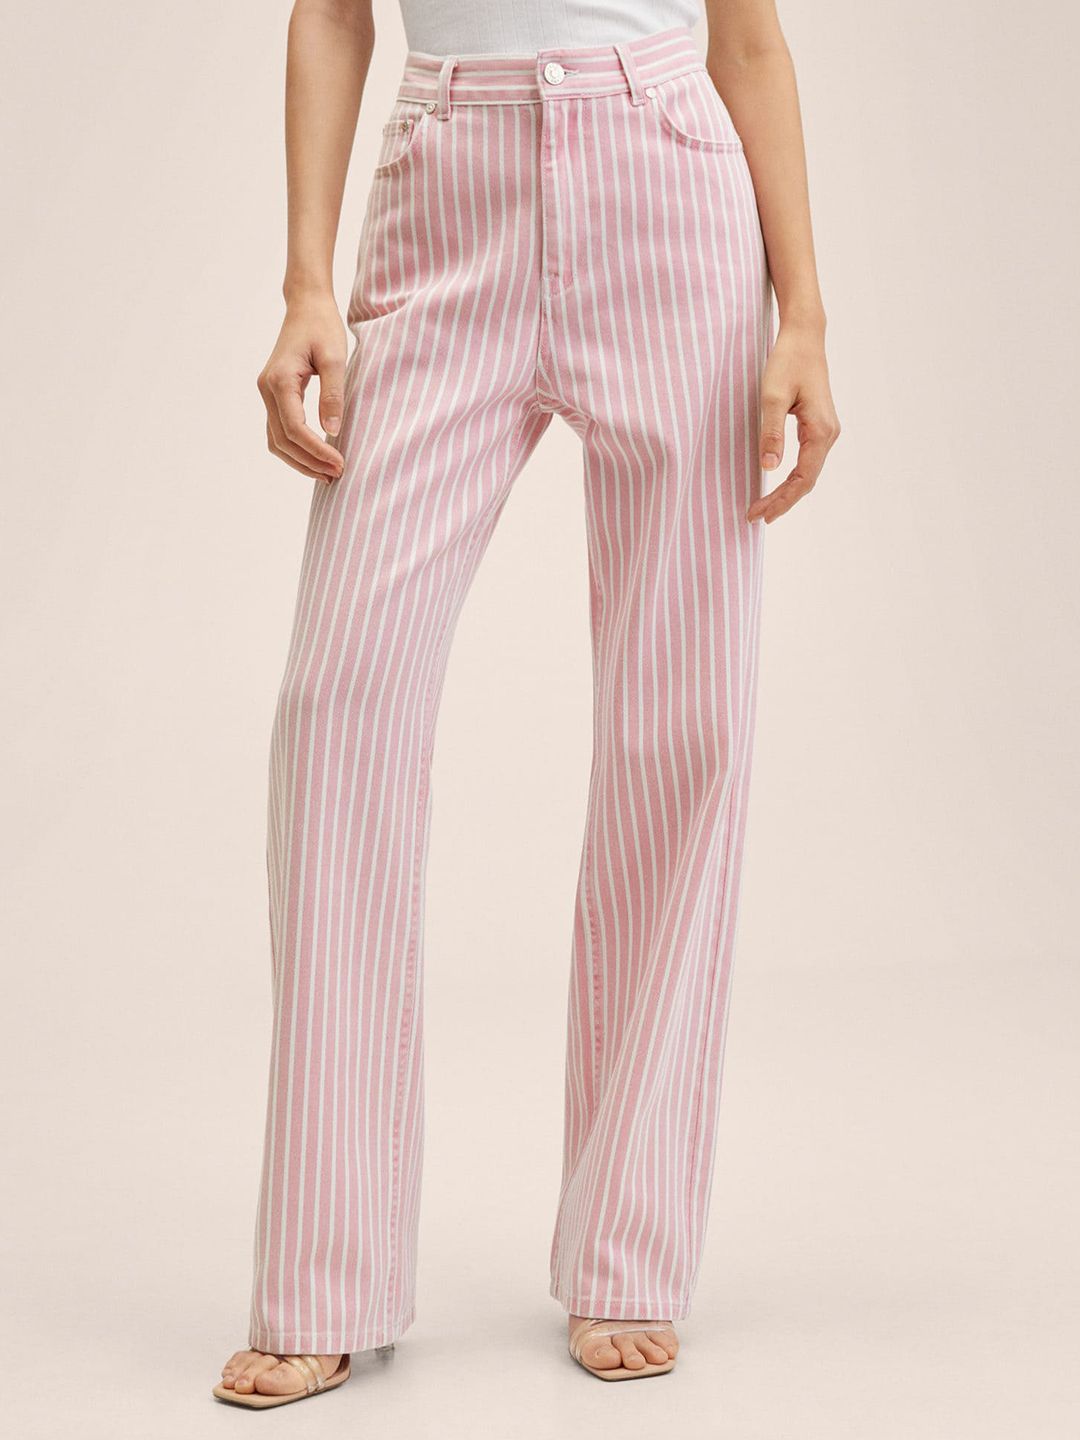 MANGO Women Pink & White Striped Stretchable Pure Cotton Jeans Price in India